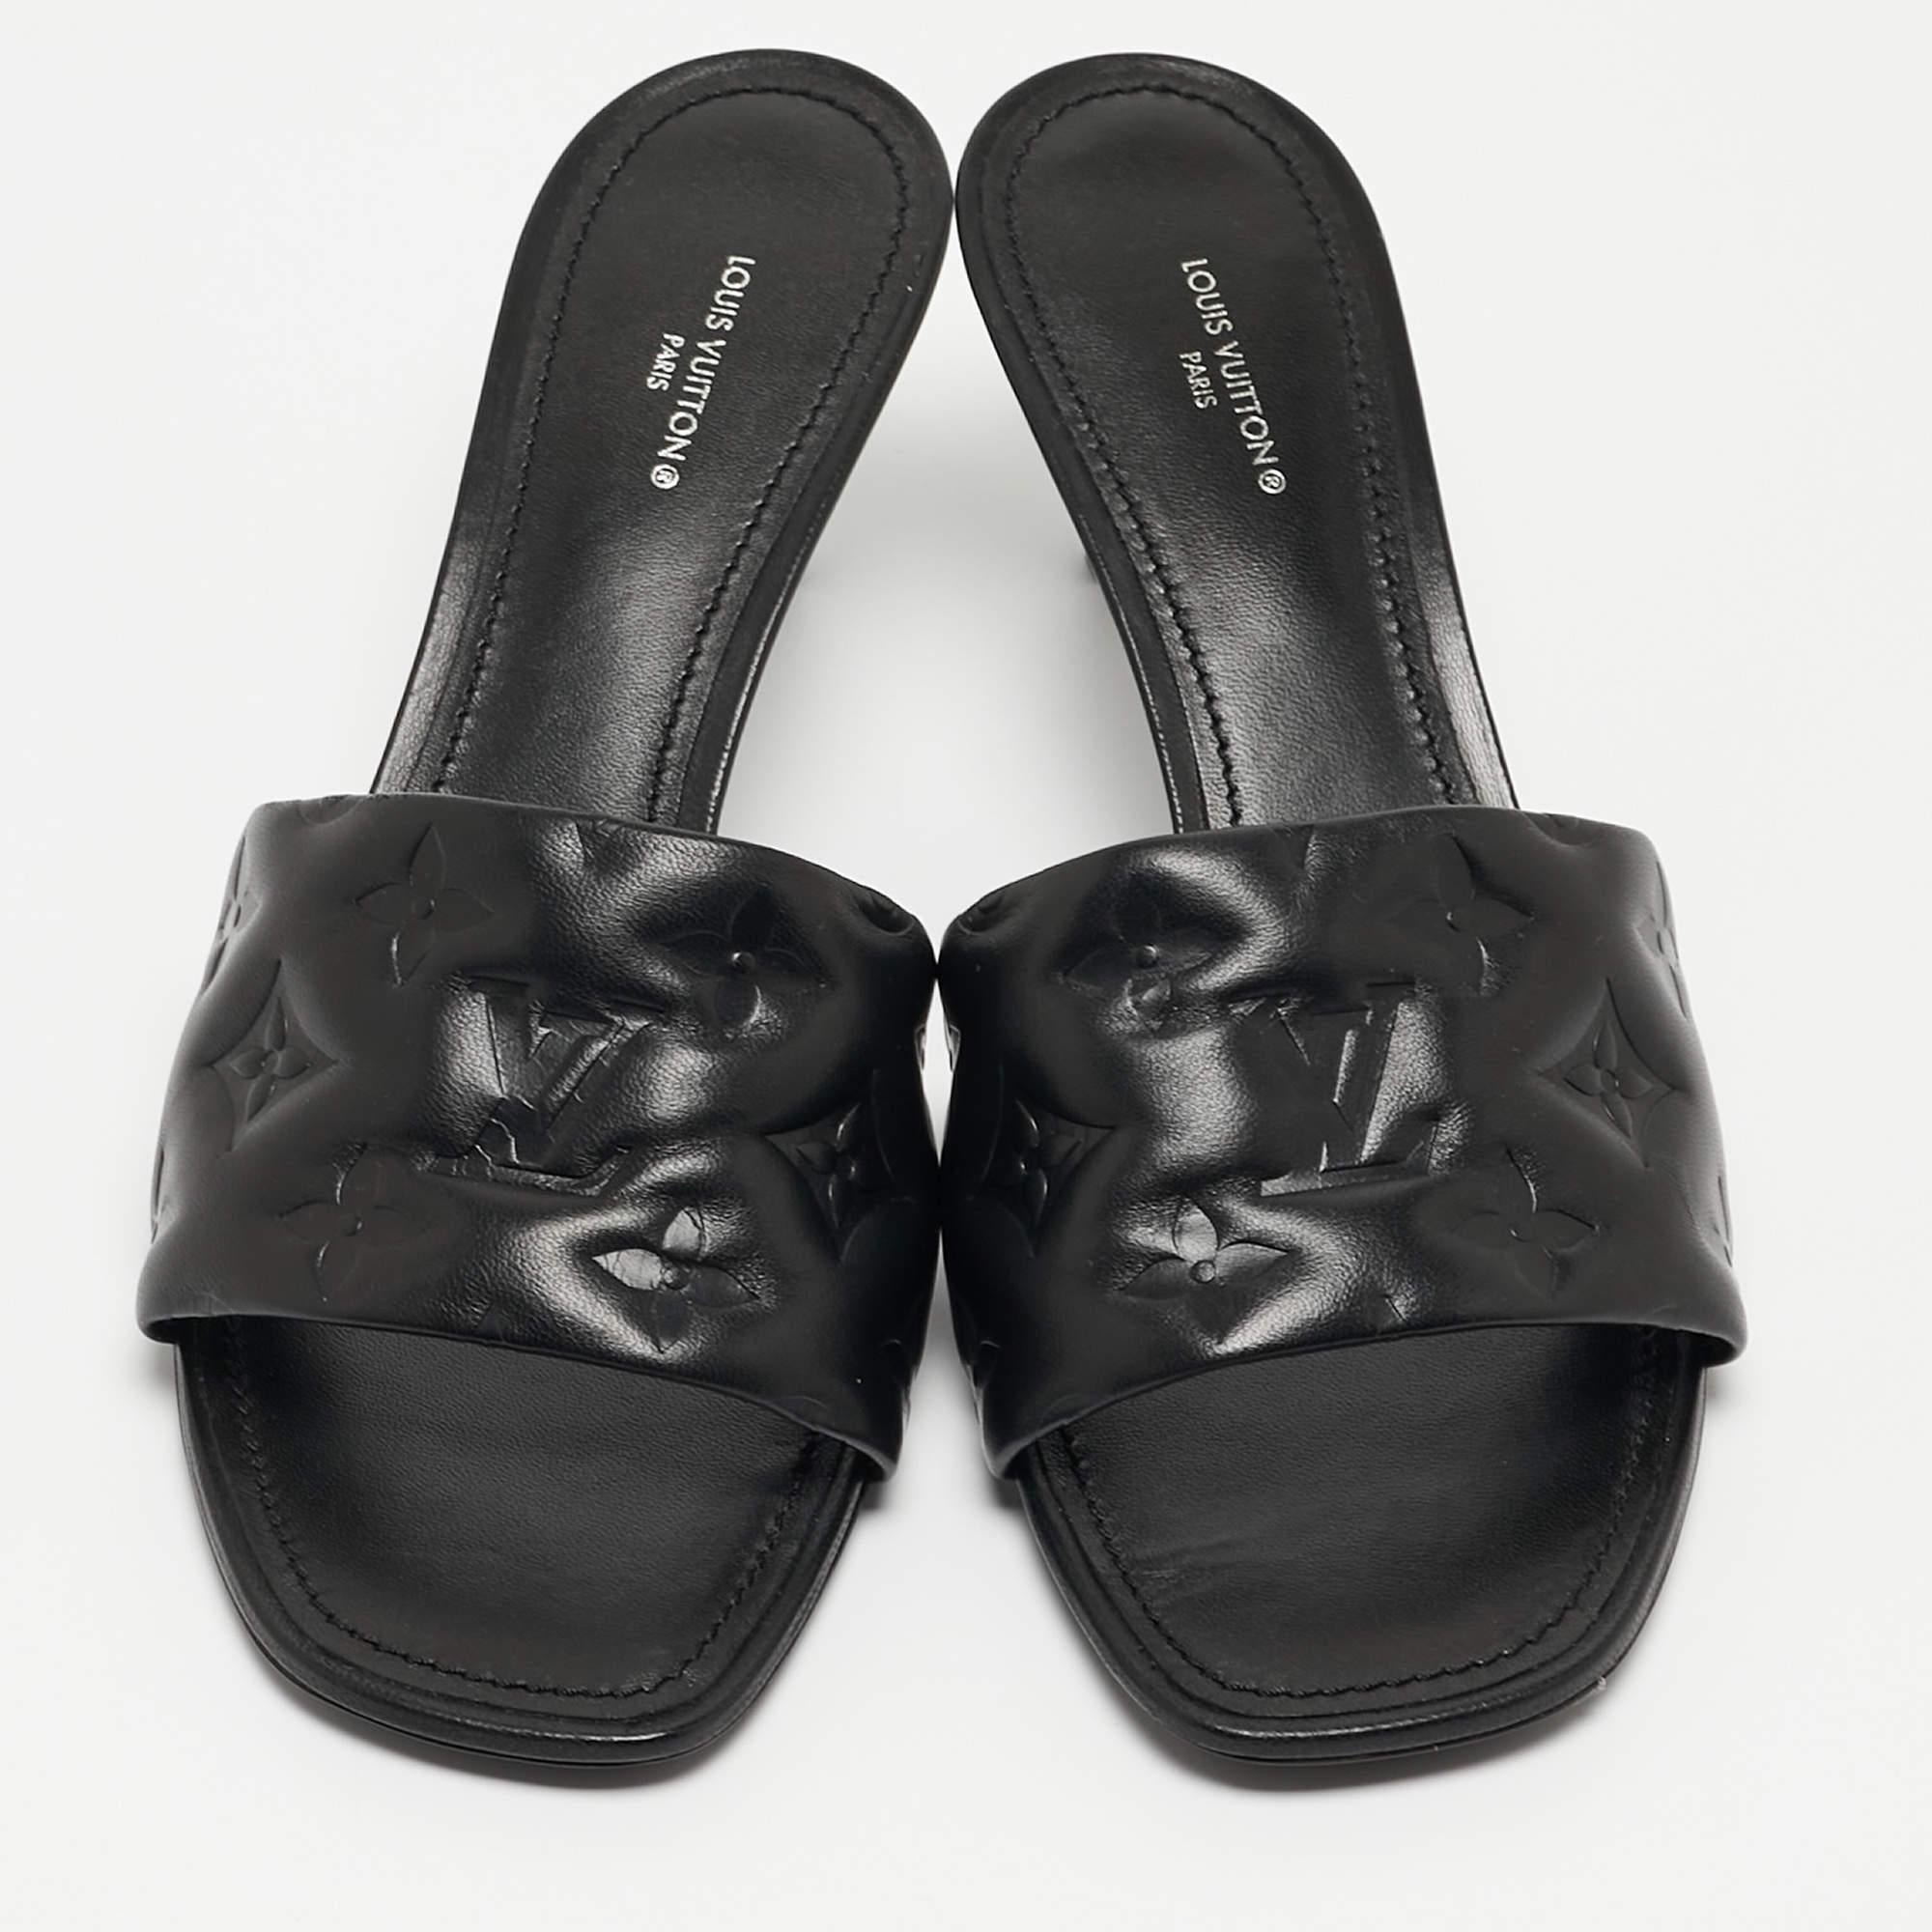 Enhance your looks with a touch of high style with these designer slides. Rendered in quality material with a lovely hue adorning its expanse, this pair is a must-have!

Includes
Original Dustbag, Original Box, Extra heel tips